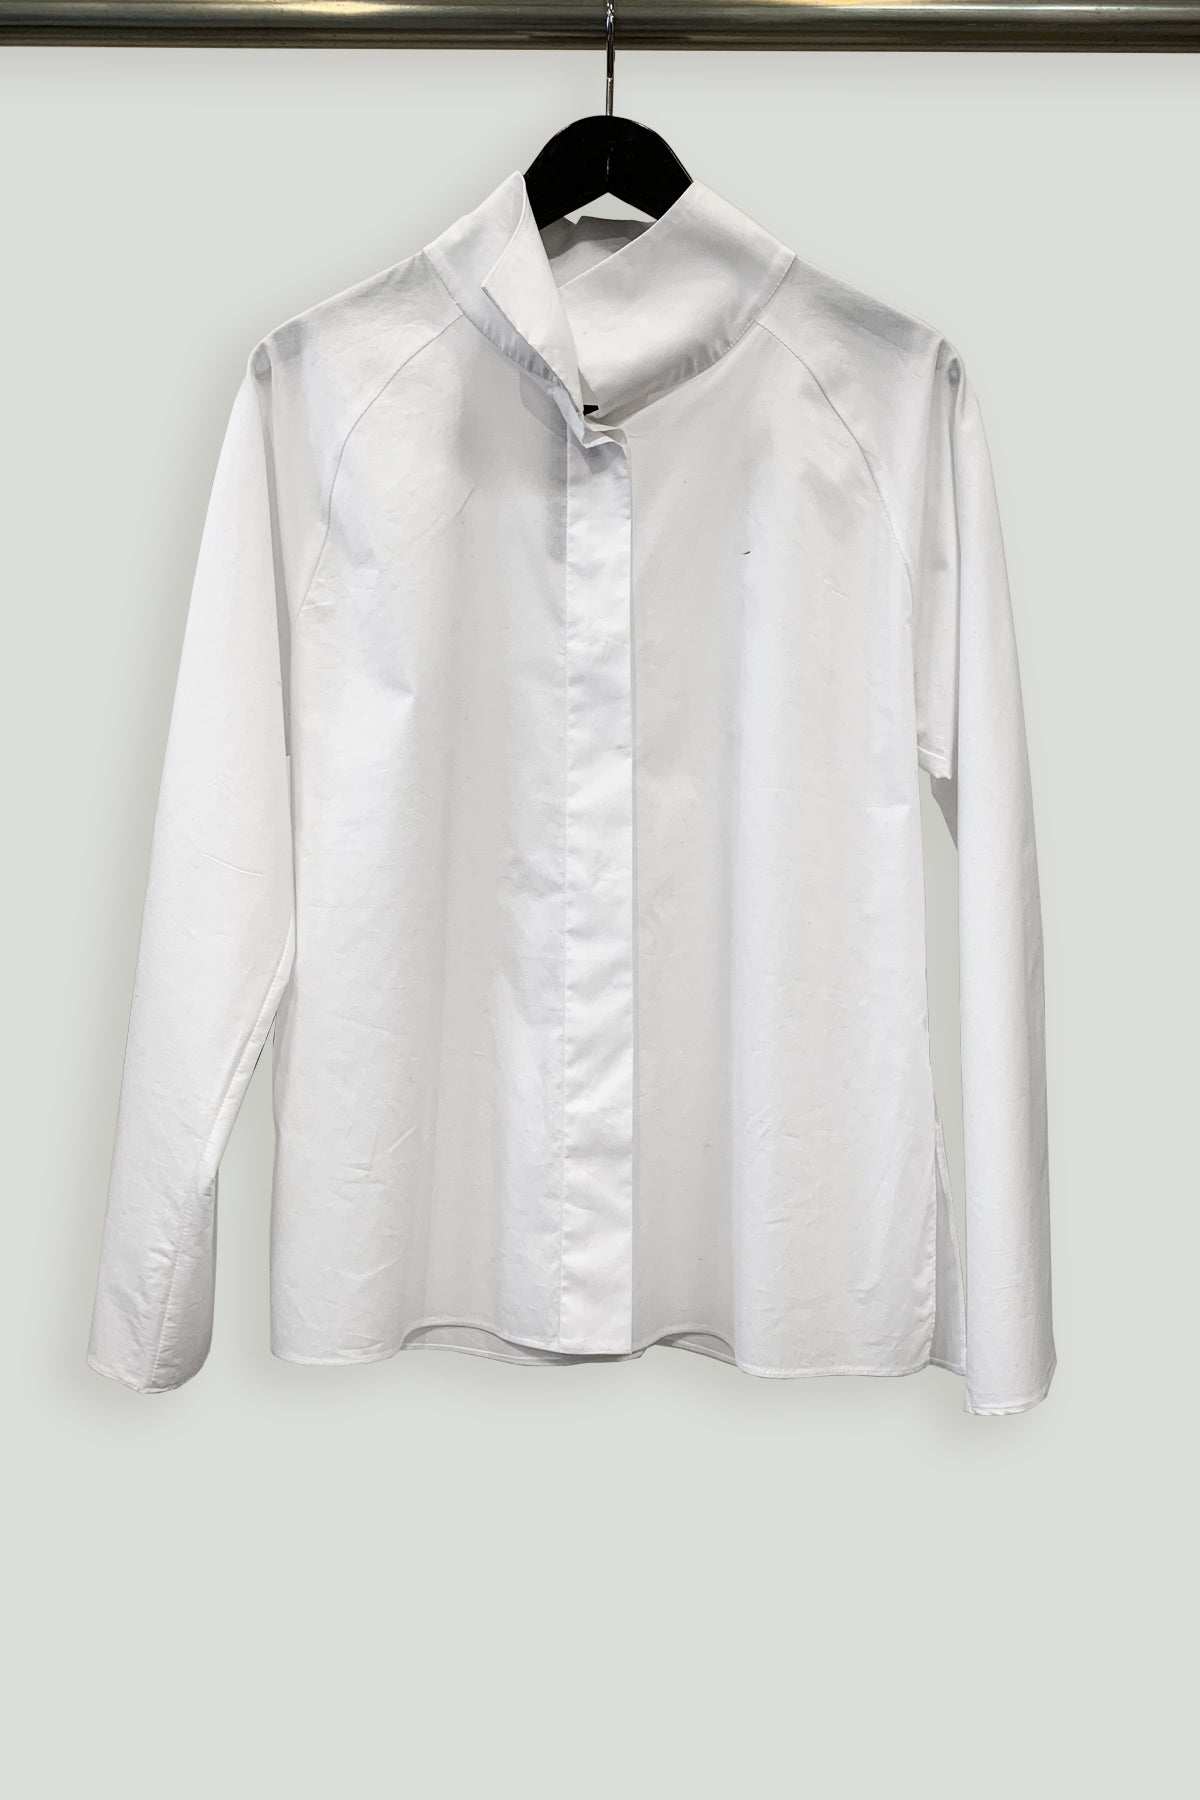 The Zoom Blouse in Paper Cotton with Raglan Sleeves and a High Collar - 8